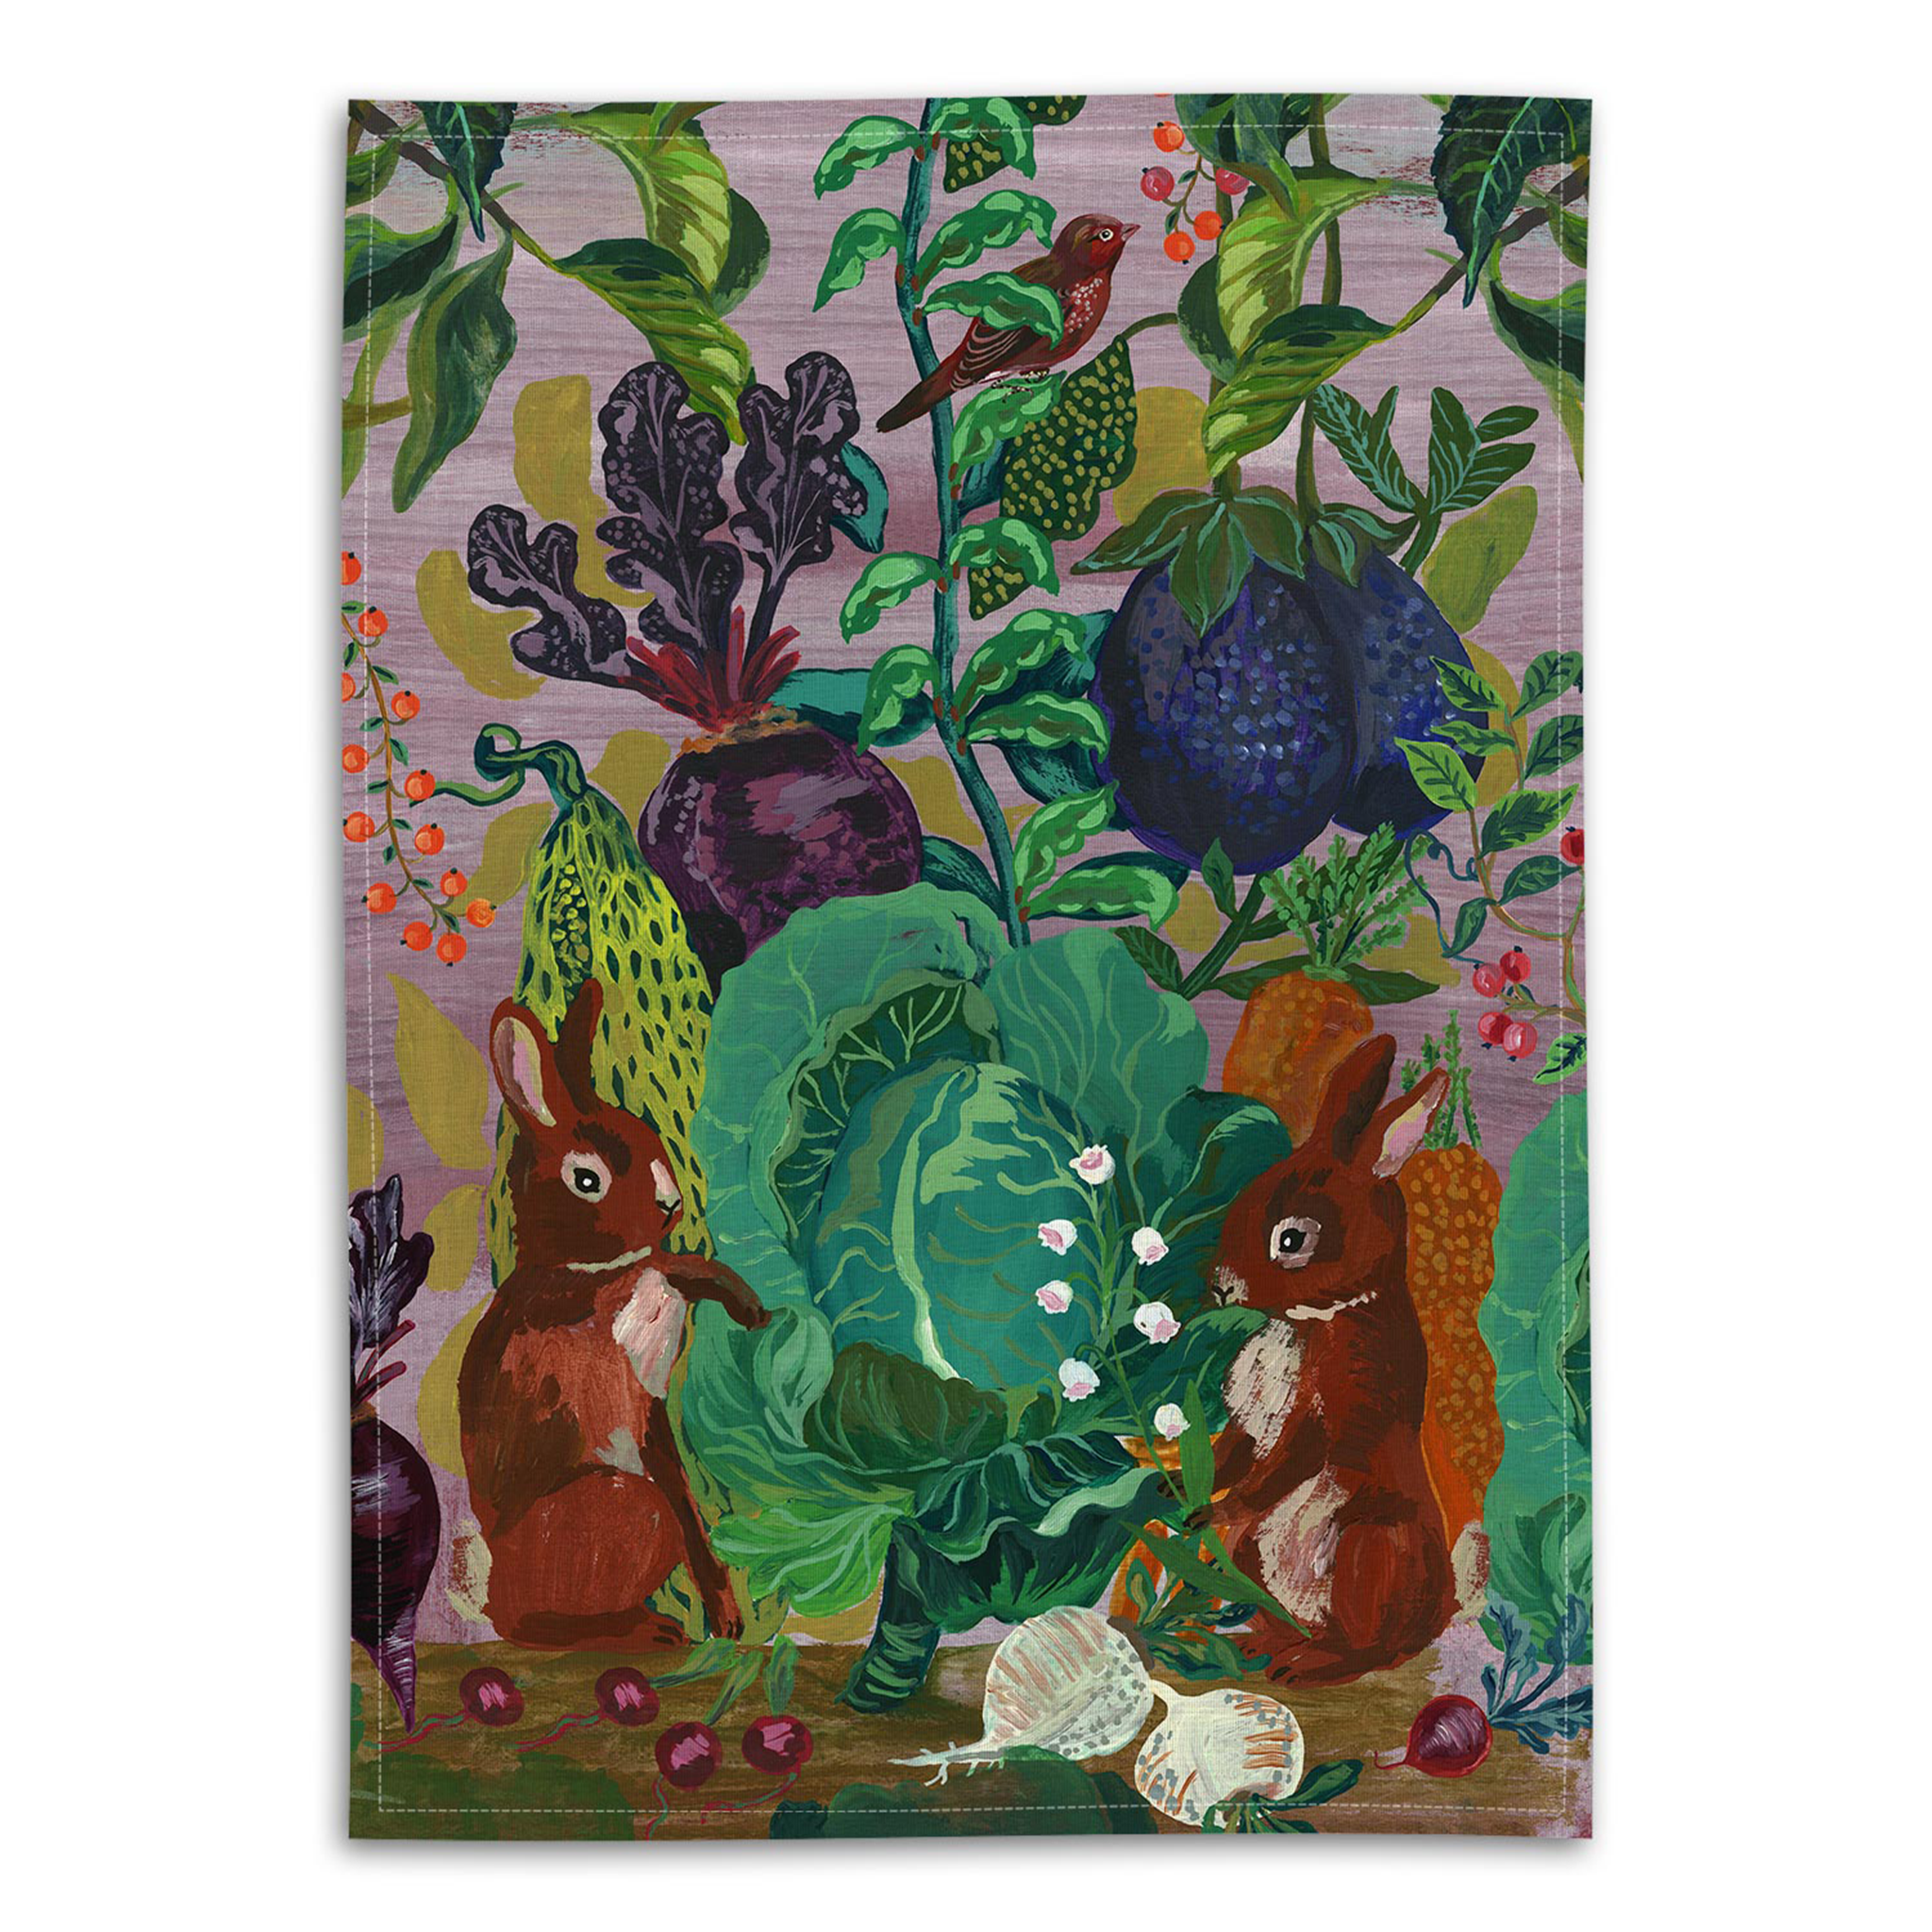 a linen tea towel features a charming illustration of two curious rabbits amidst a vibrant display of colorful foliage